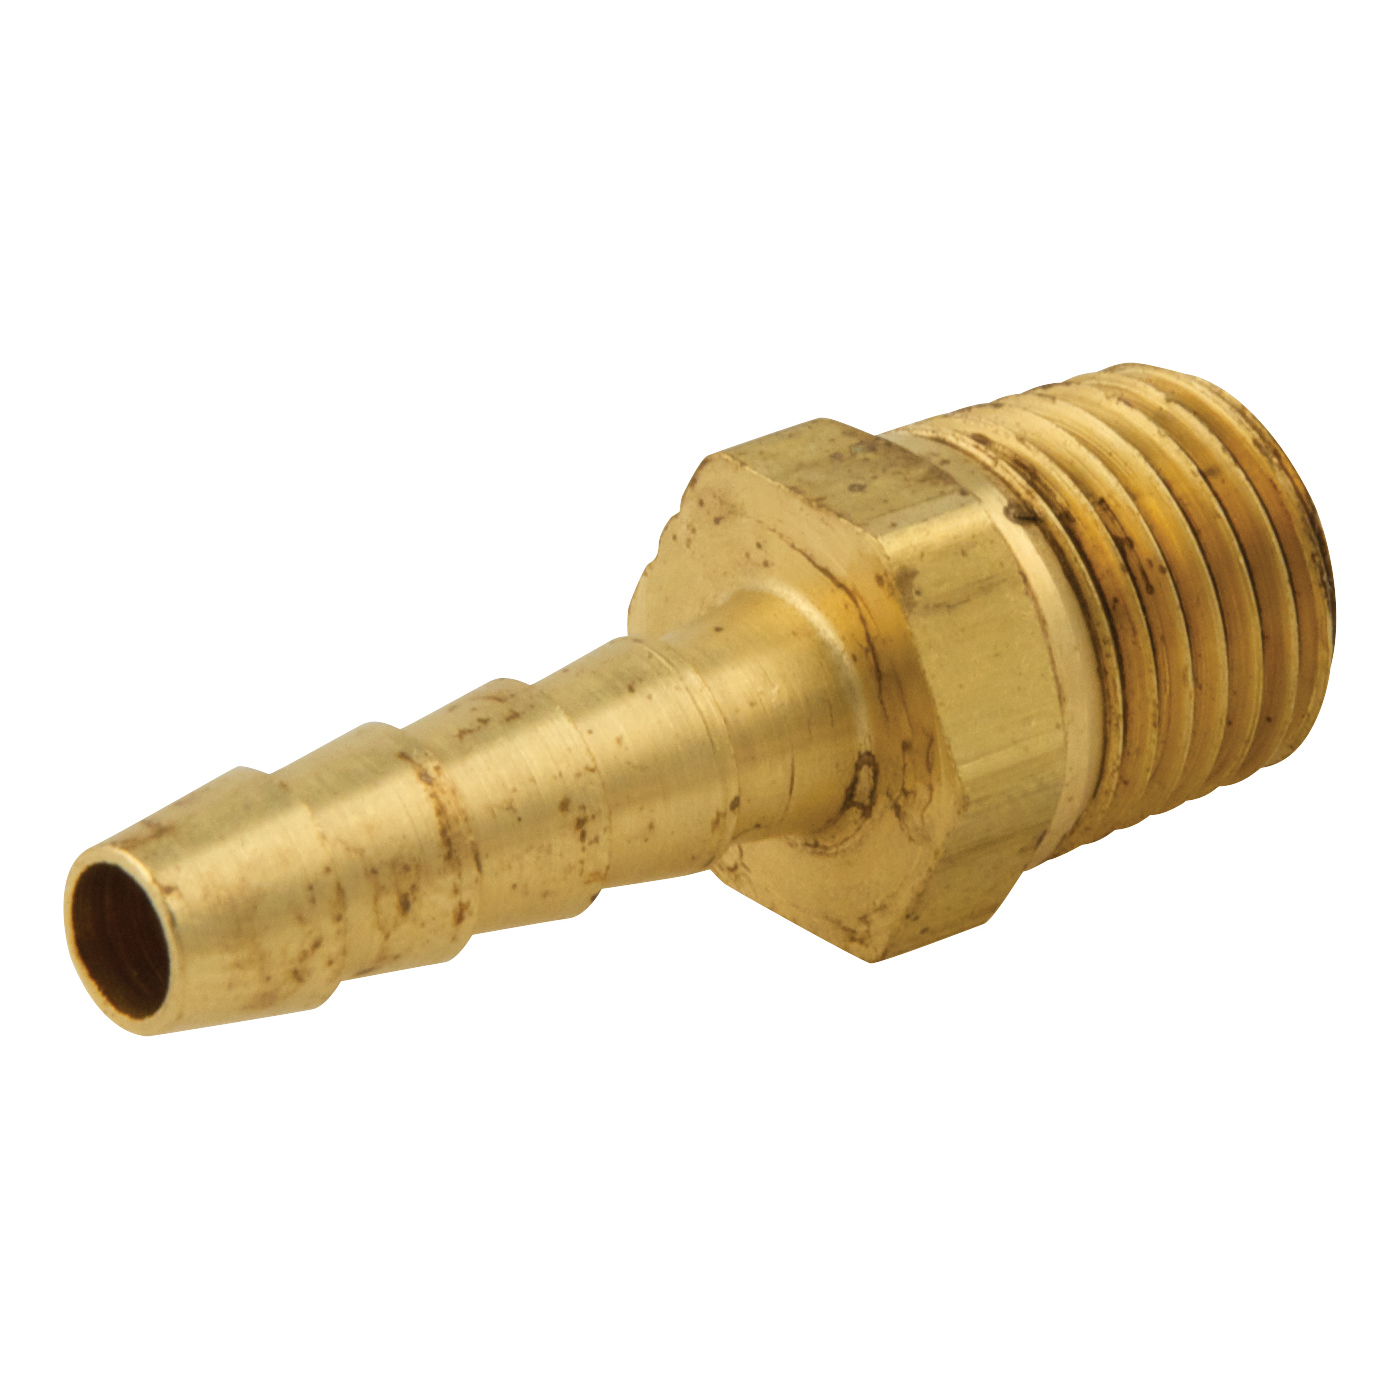 Hose barb fitting - Male adapter - Master Plumber®